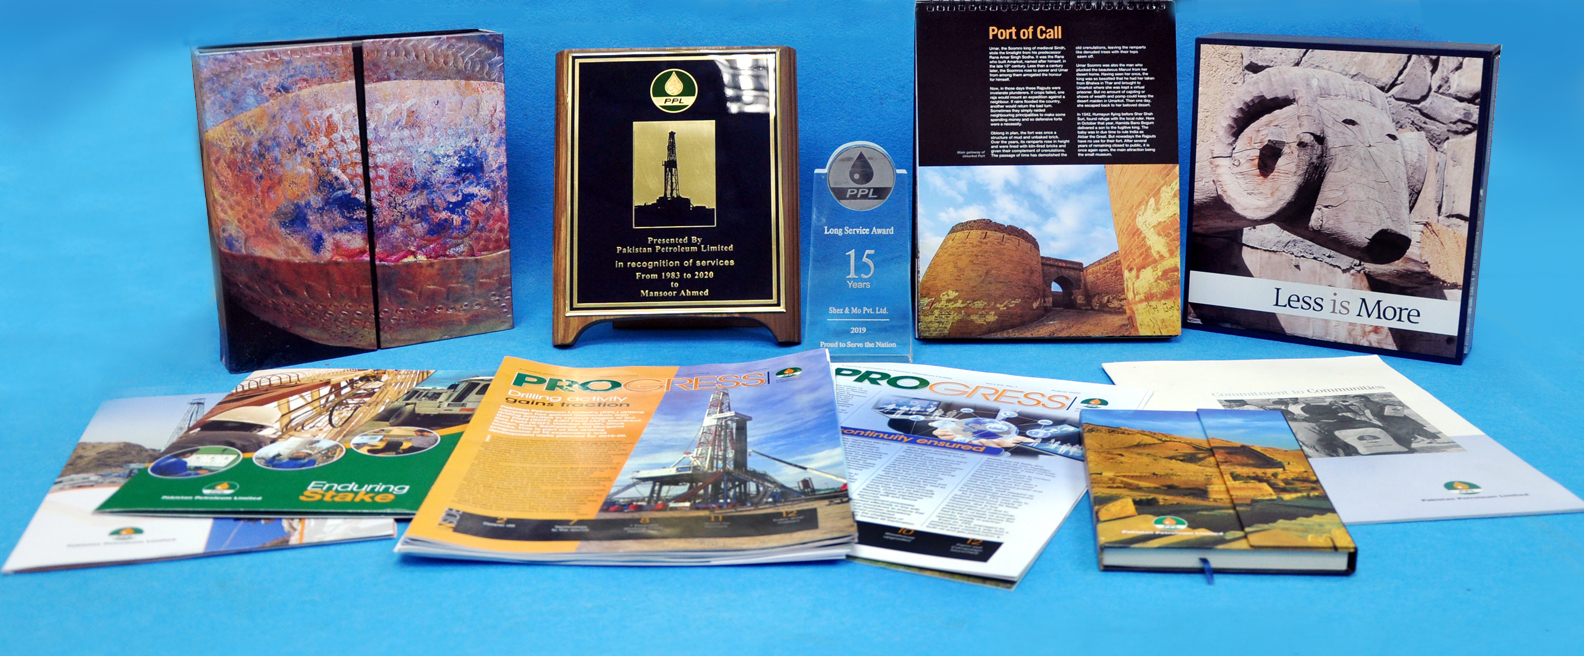 Publications developed by Corporate Communications 